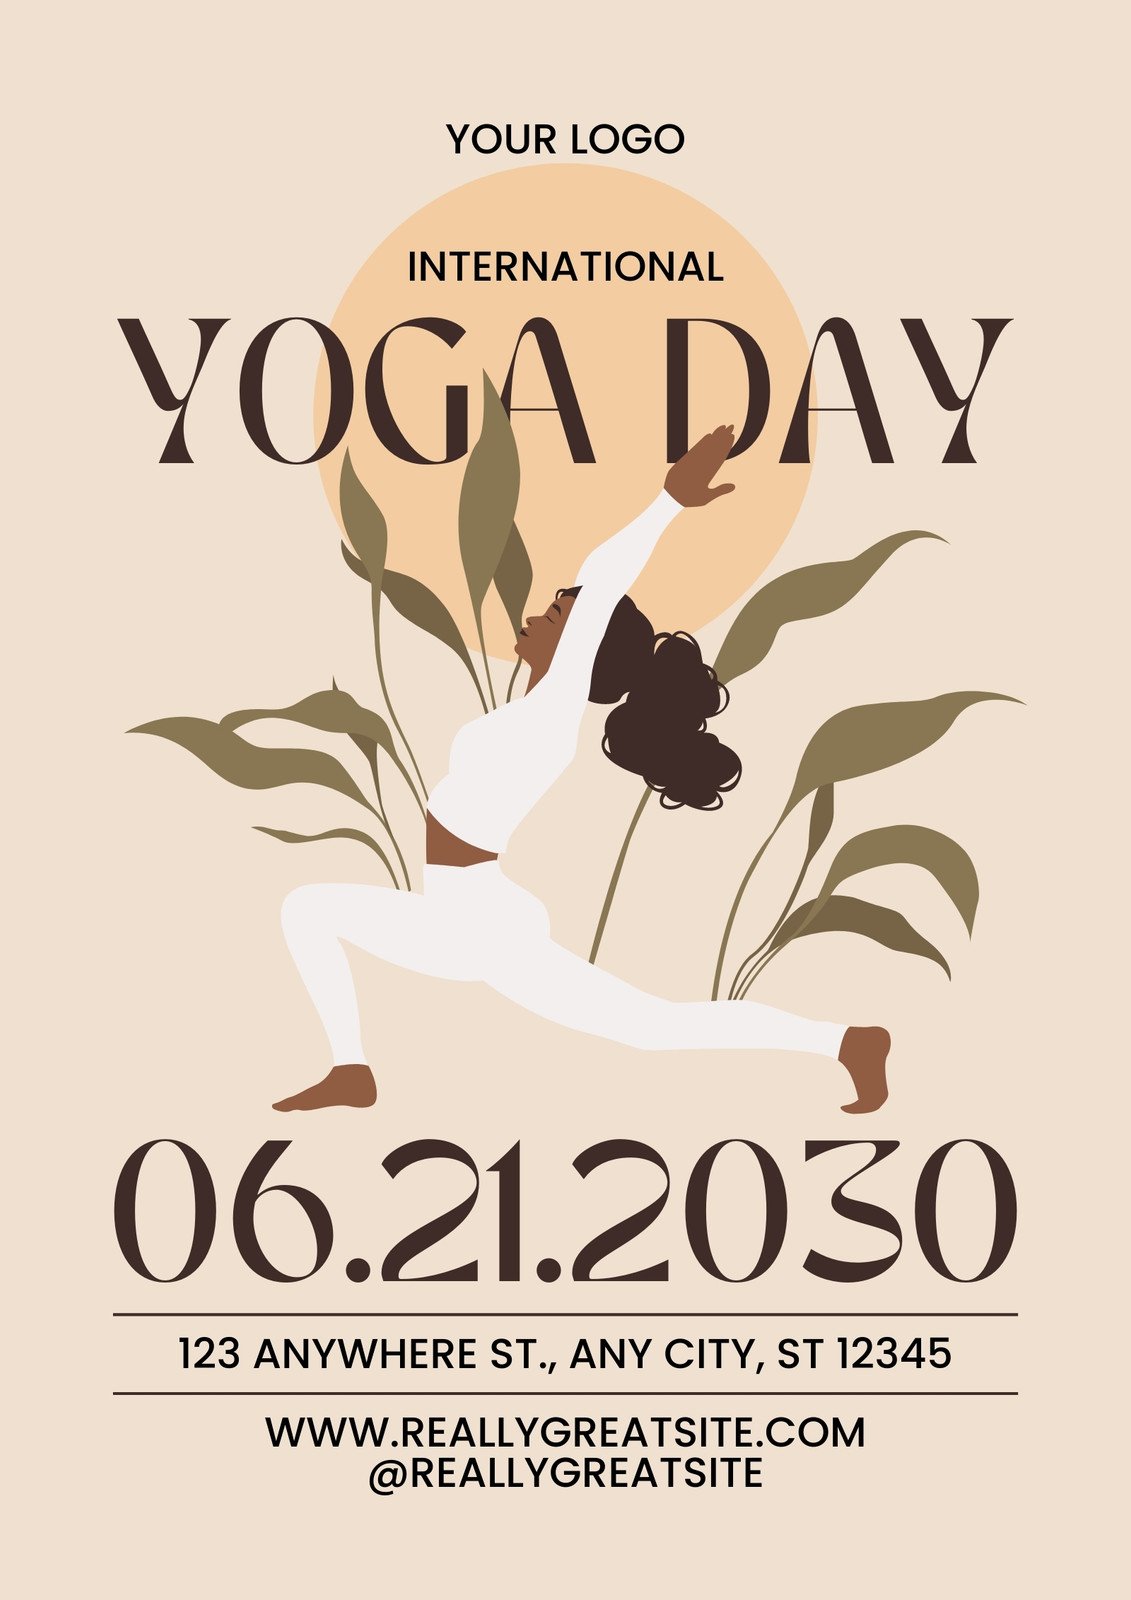 Yoga Web Design Images :: Photos, videos, logos, illustrations and